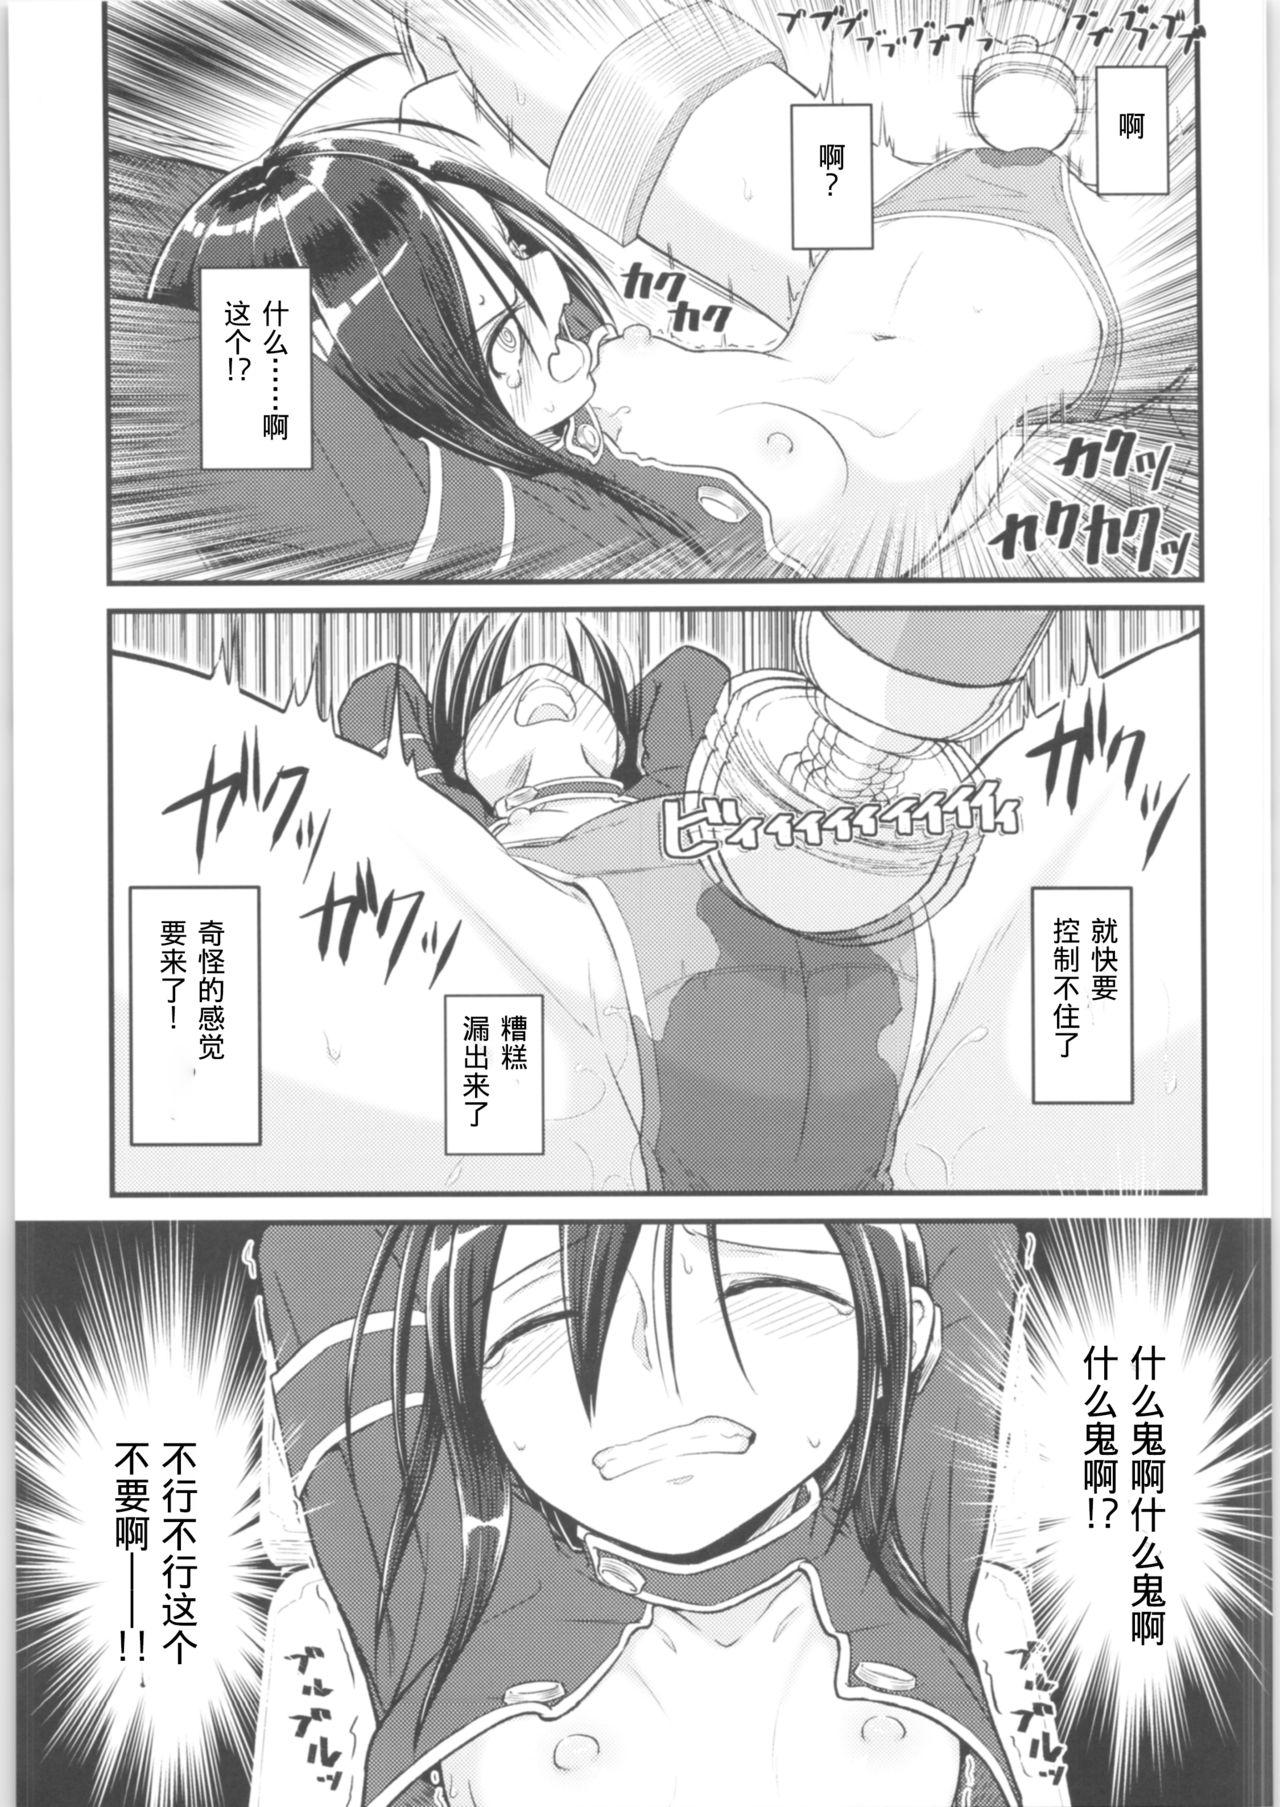 Hermosa Kiriko Route Another #01 - Sword art online Analfuck - Page 12